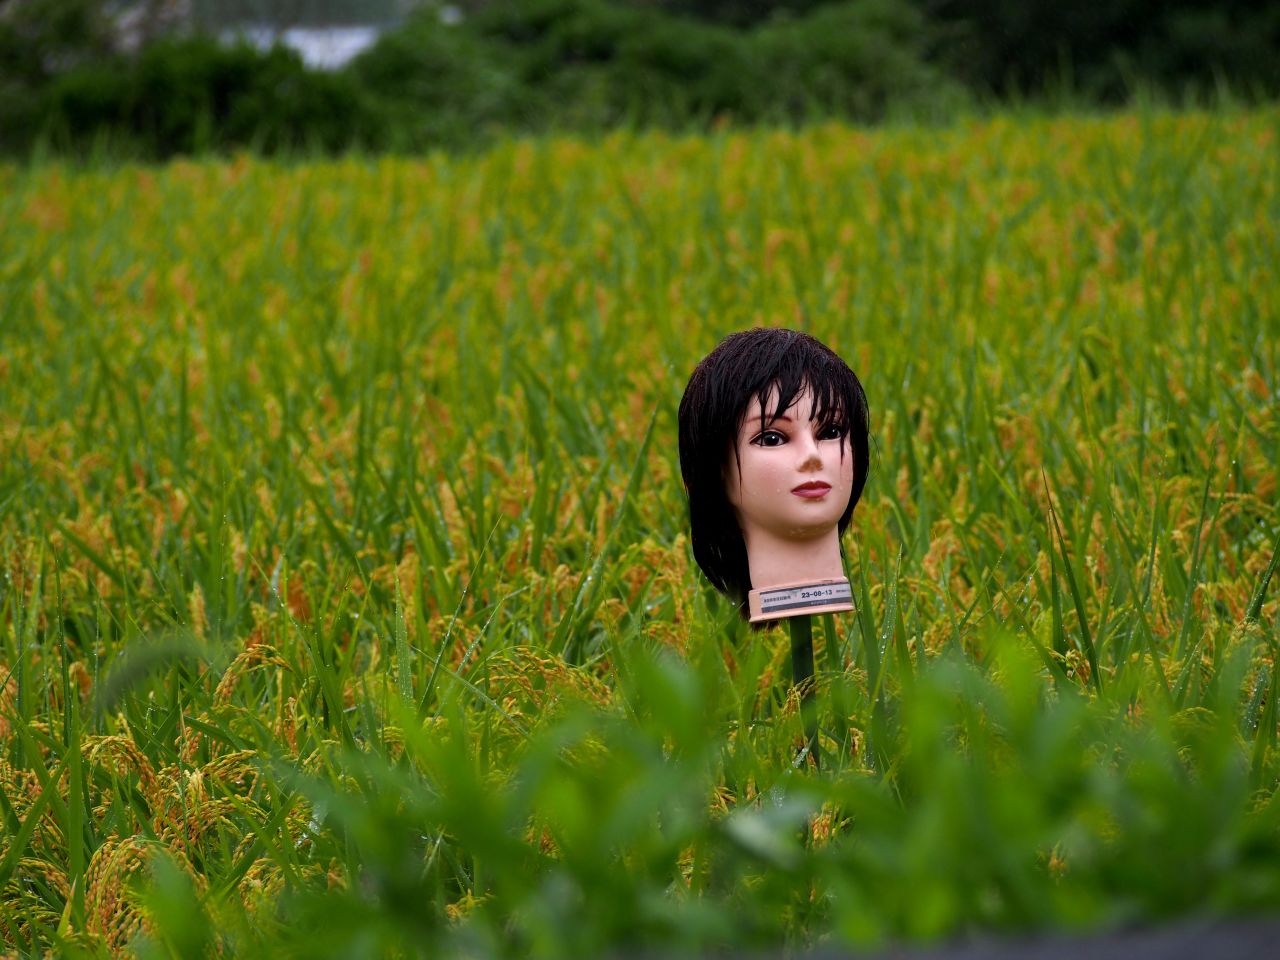 Kensuke Okada, a professor at the University of Tokyo's International Program in Agricultural Development Studies, says scarecrows are "known to be an ineffective way for protect the crops from birds, nor it is widely practiced in Japan."